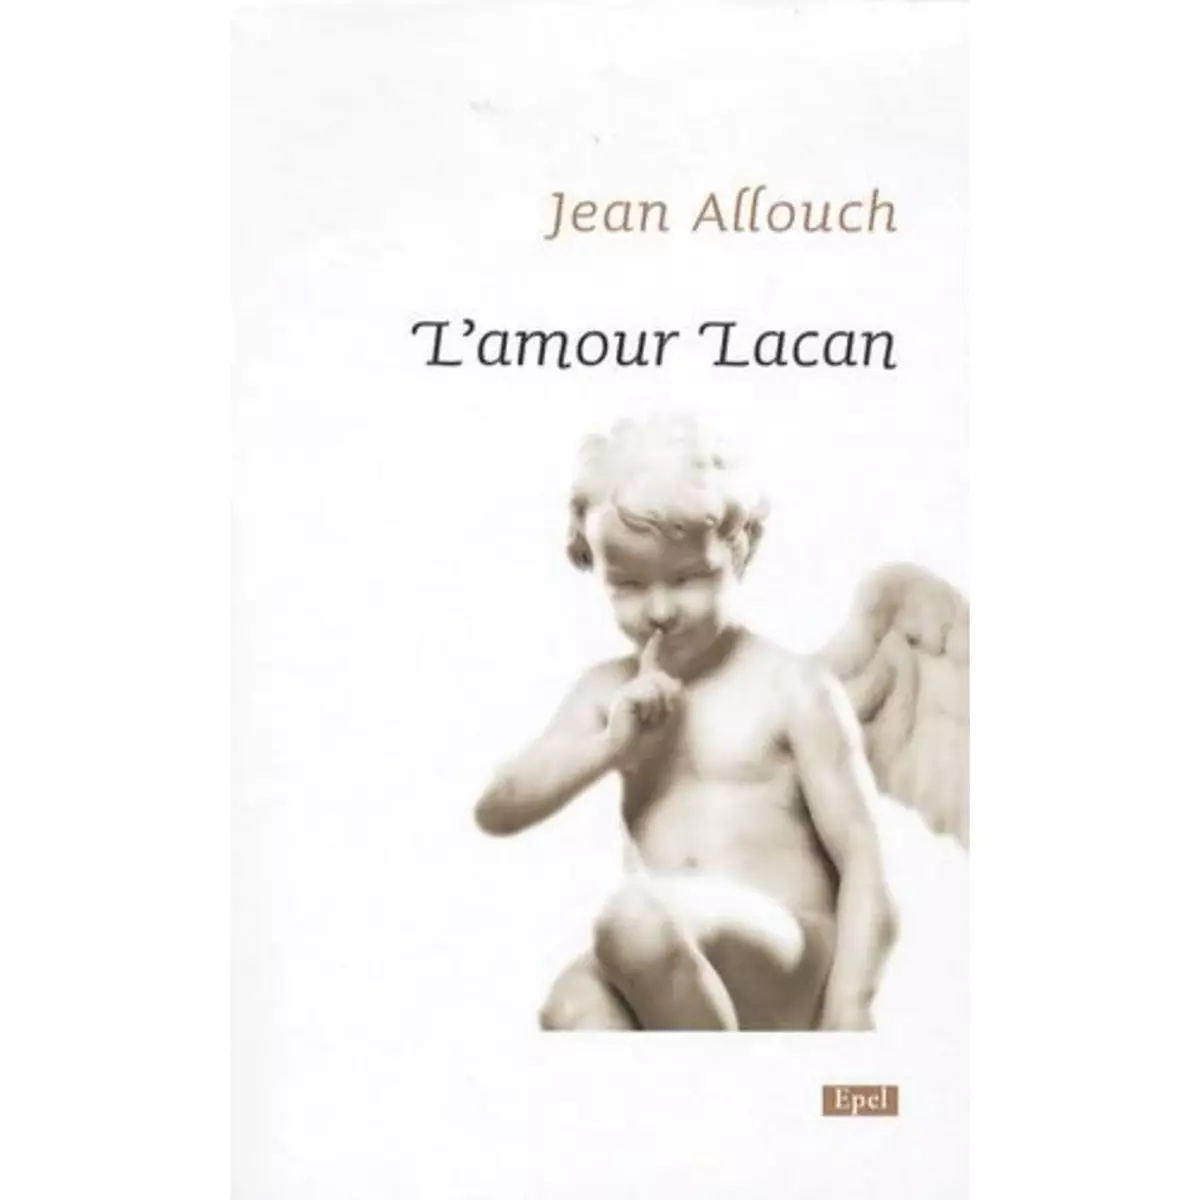  L'AMOUR LACAN, Allouch Jean